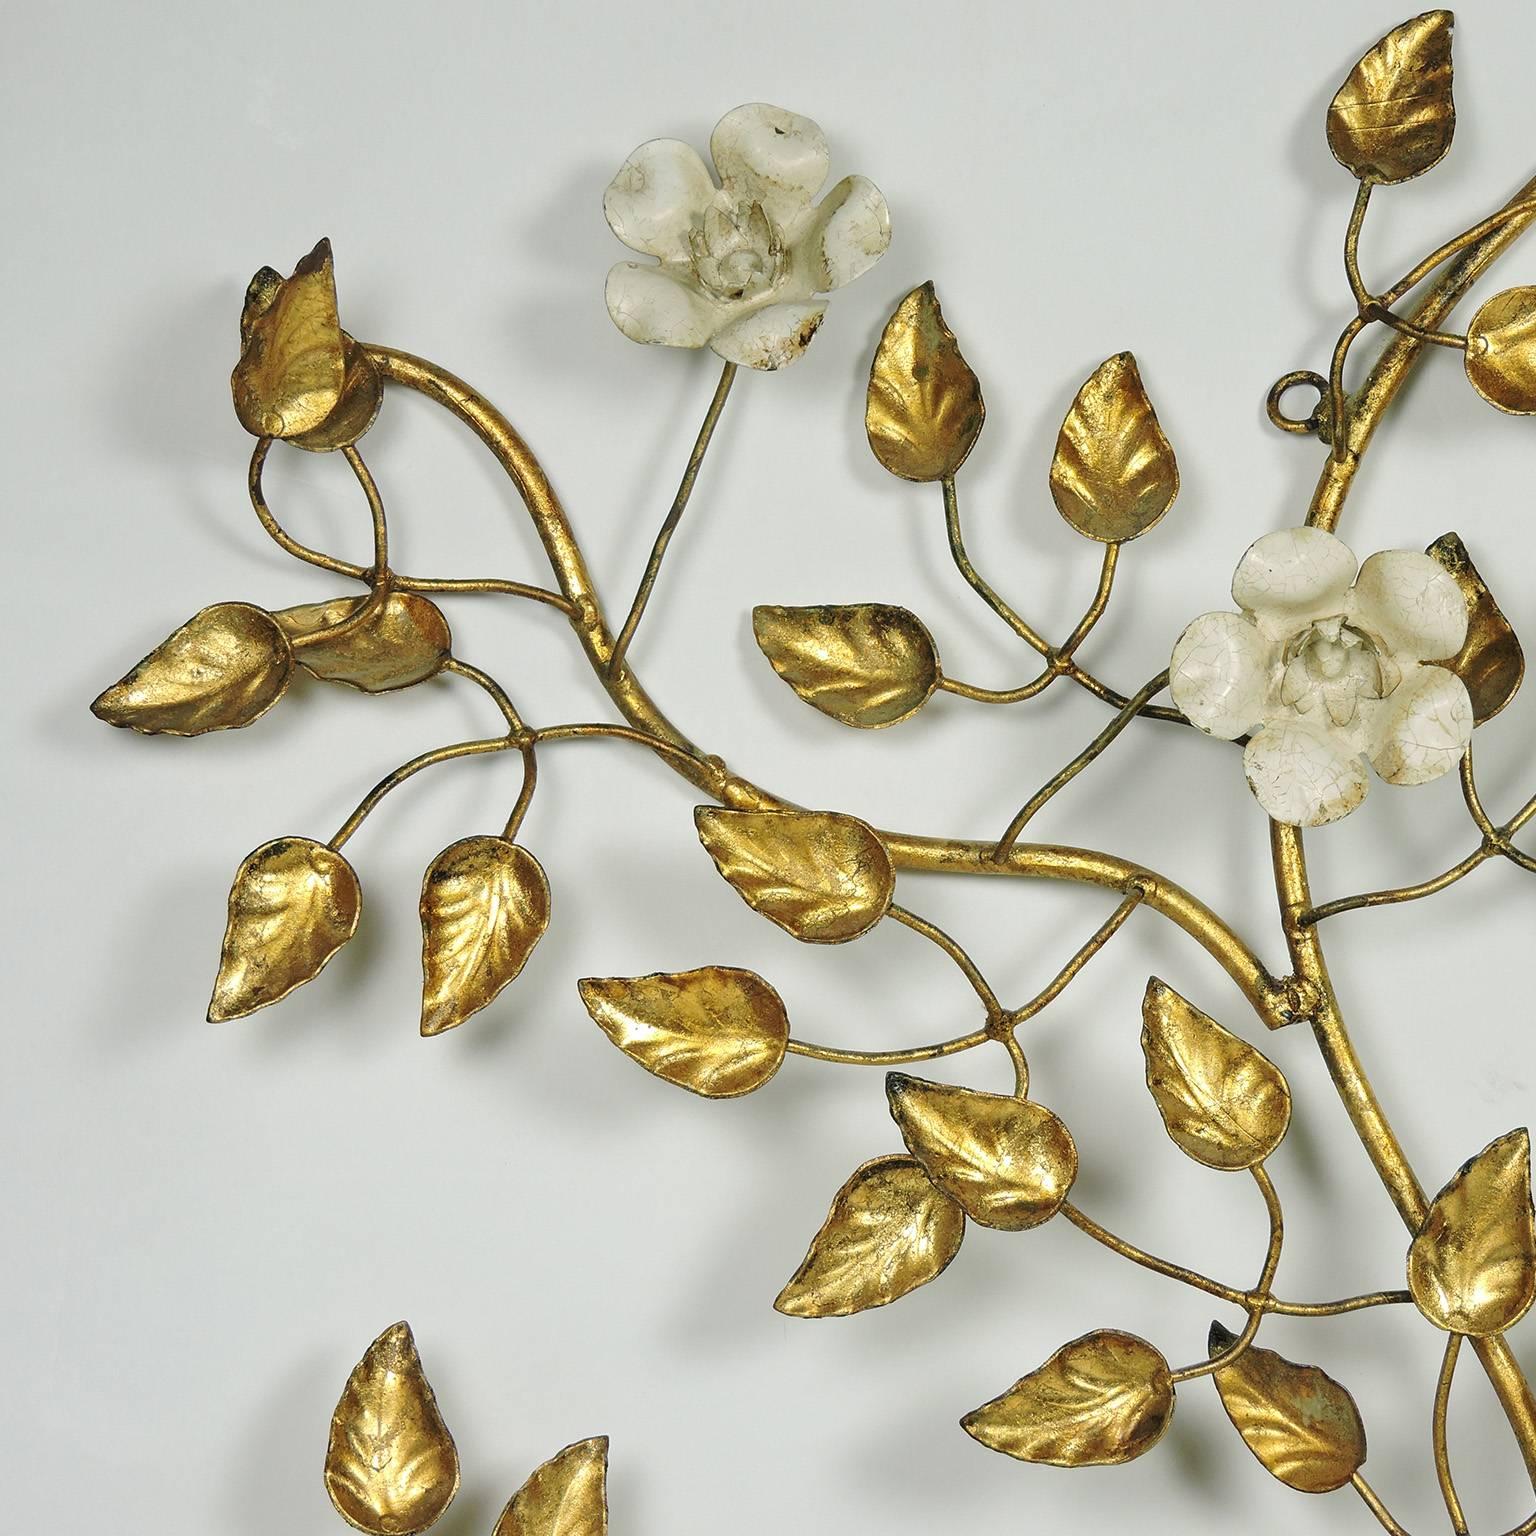 Vintage Italian Mid-Century Modern gilt and tole painted metal floral wall decoration, 20th century. Comprised of a meandering vine of gilt branches and leaves adorned with white tole flowers. 